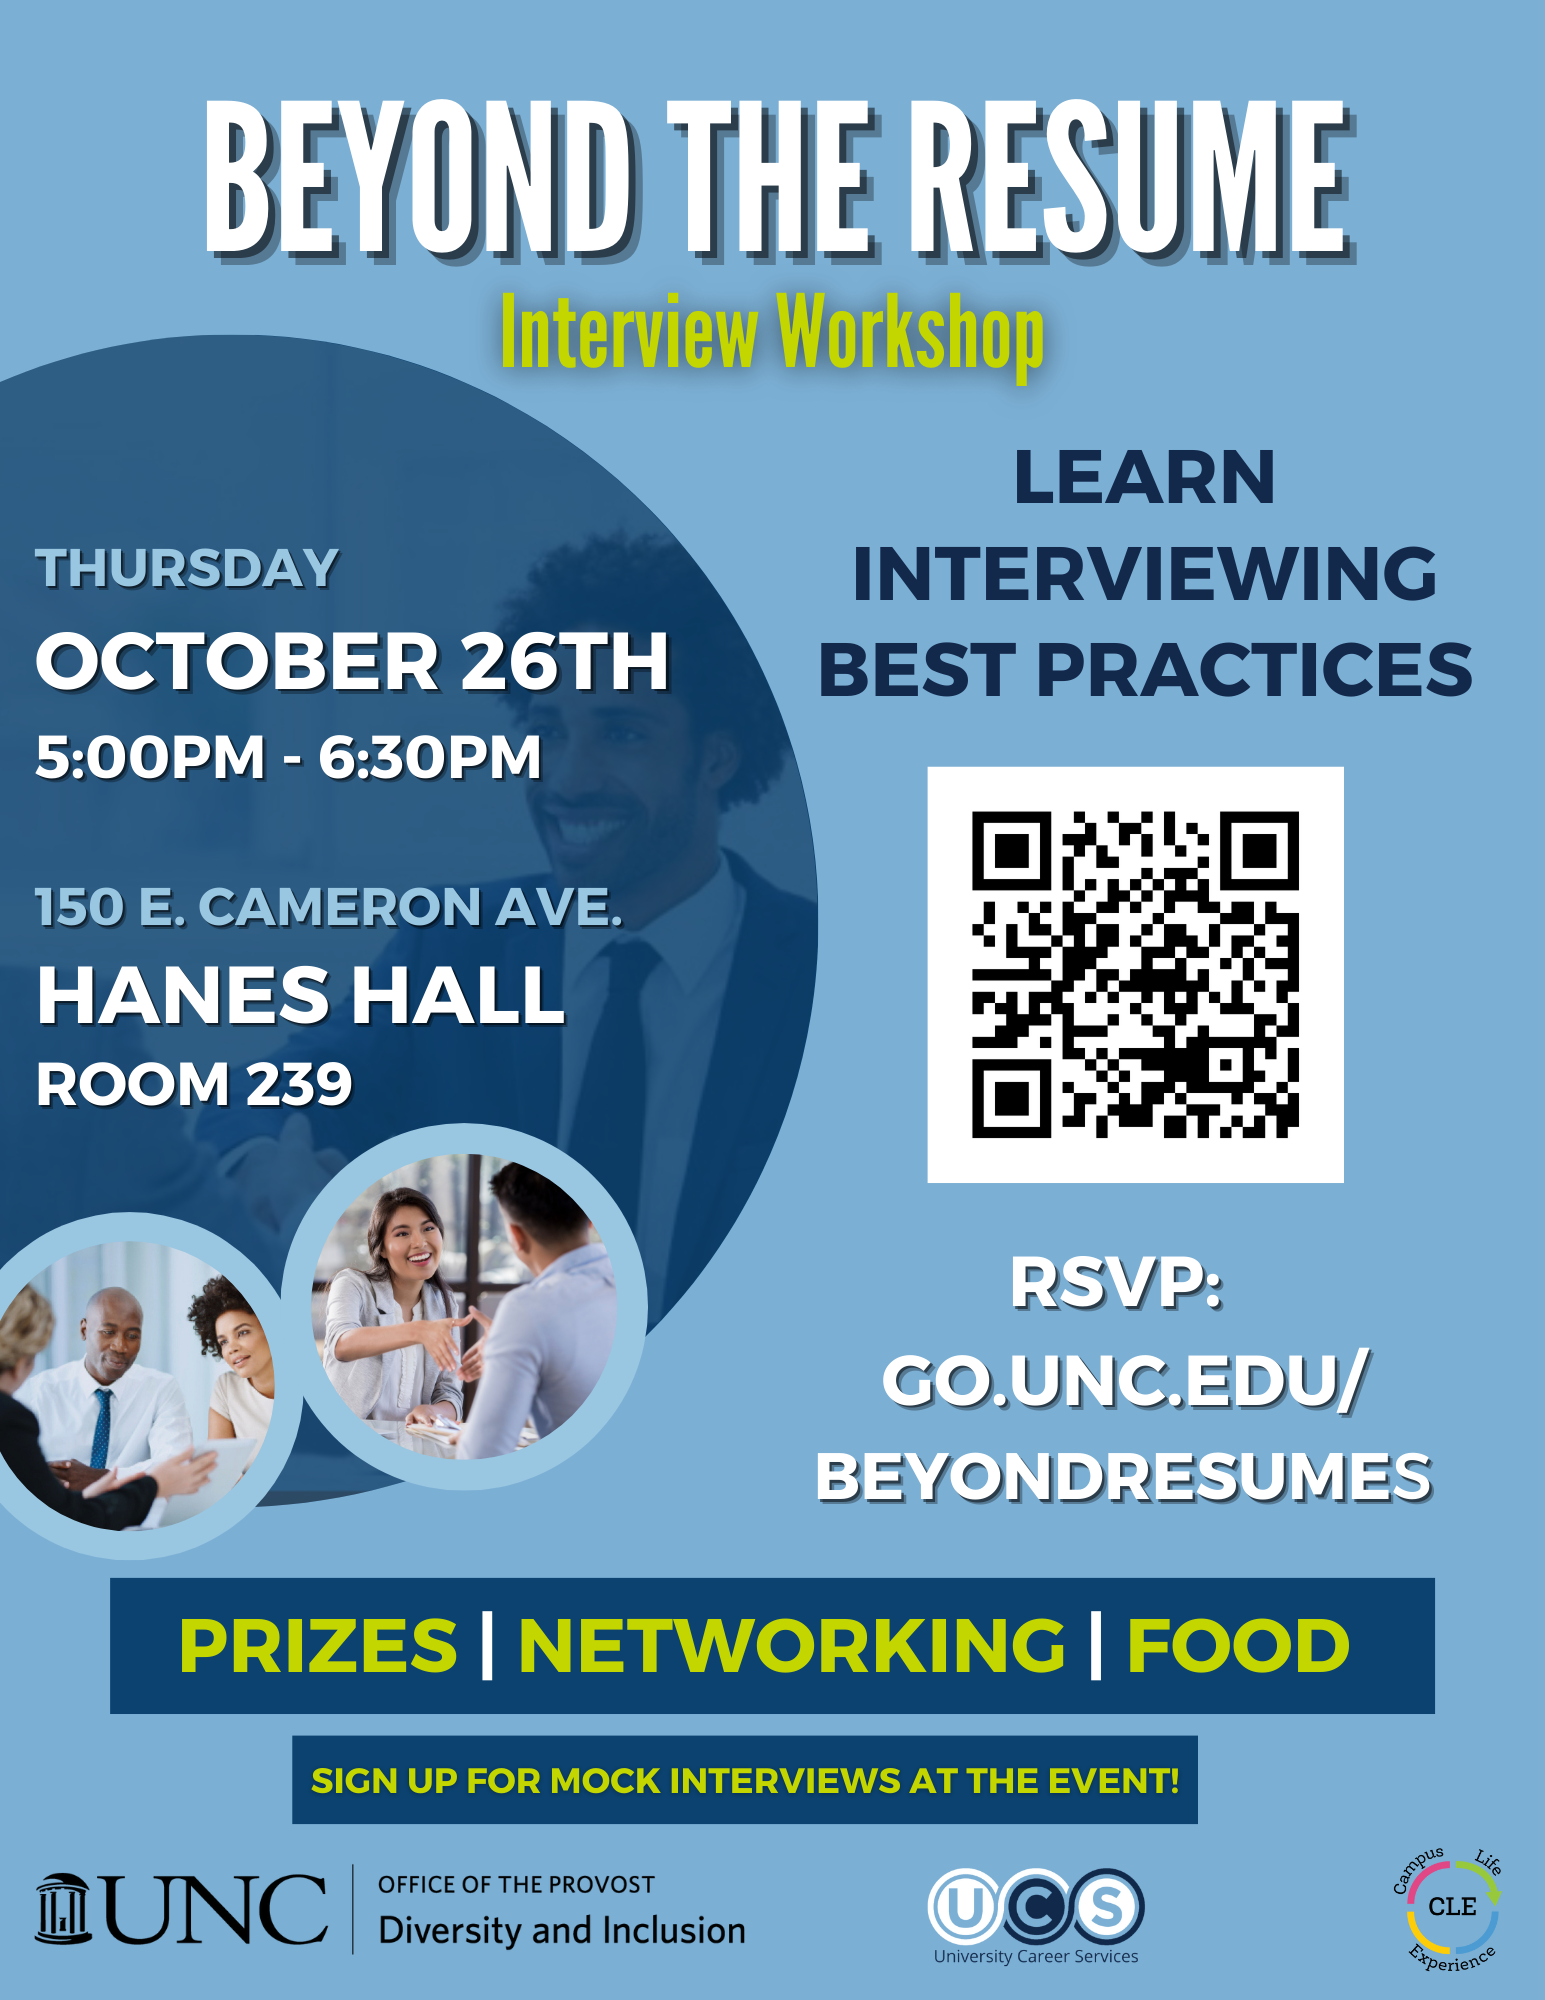 Slide promoting an interviewing workshop sponsored by Diversity & Inclusion office on October 26 at 5:00pm. Free food and prizes. Hanes Hall 239